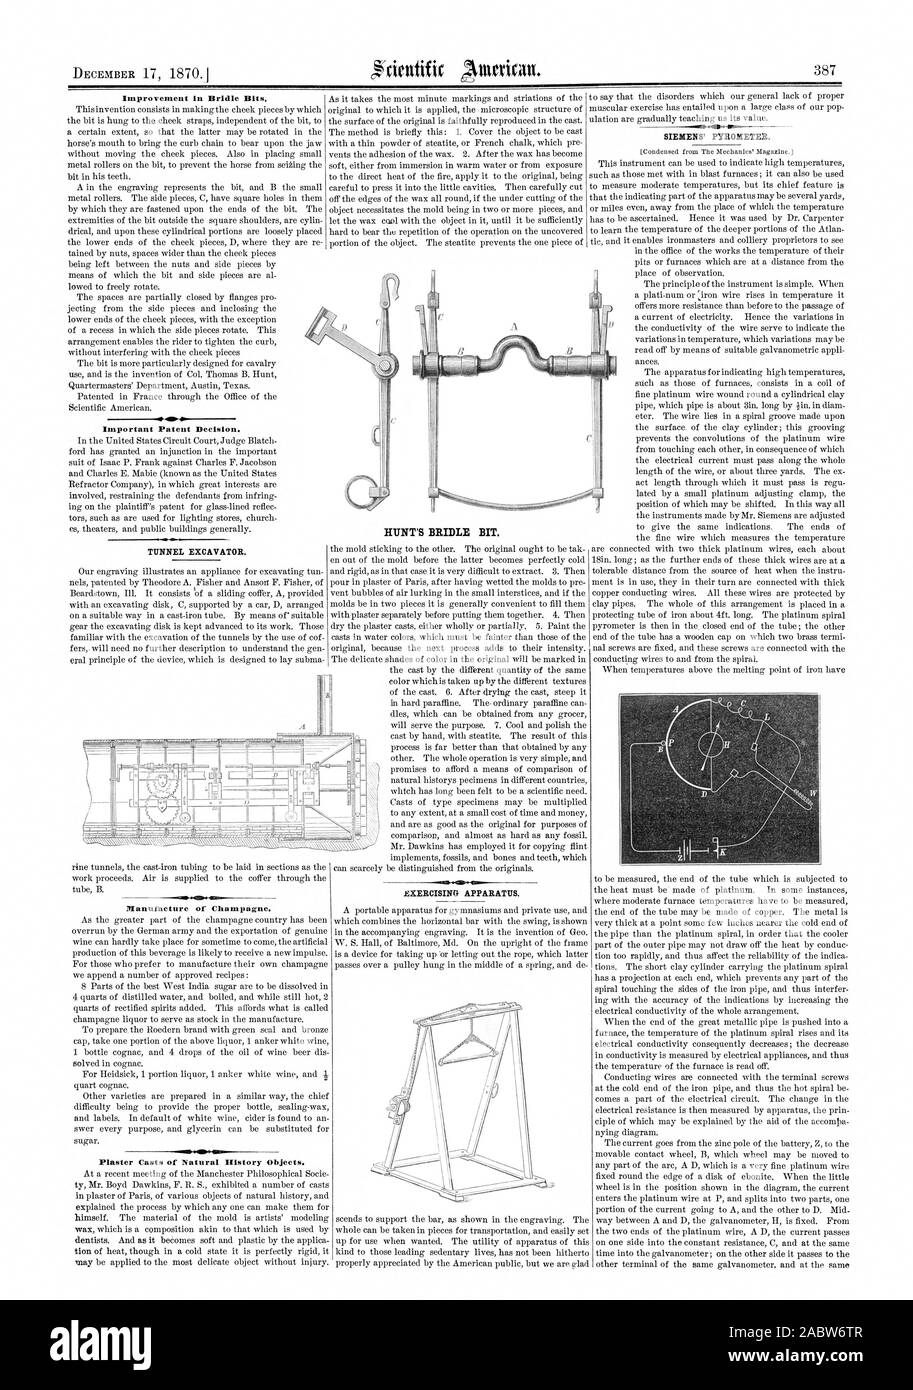 Improvement in Bridle Bits. Important Patent Decision. mi I    1 bud IN . ' .-.„ DIanuhacture of Champagne. Plaster Casts of Natural History Objects. SIEMENS' PYROMETER. TUNNEL EXCAVATOR. EXERCISING APPARATUS. HUNT'S BRIDLE BIT., scientific american, 1870-12-17 Stock Photo